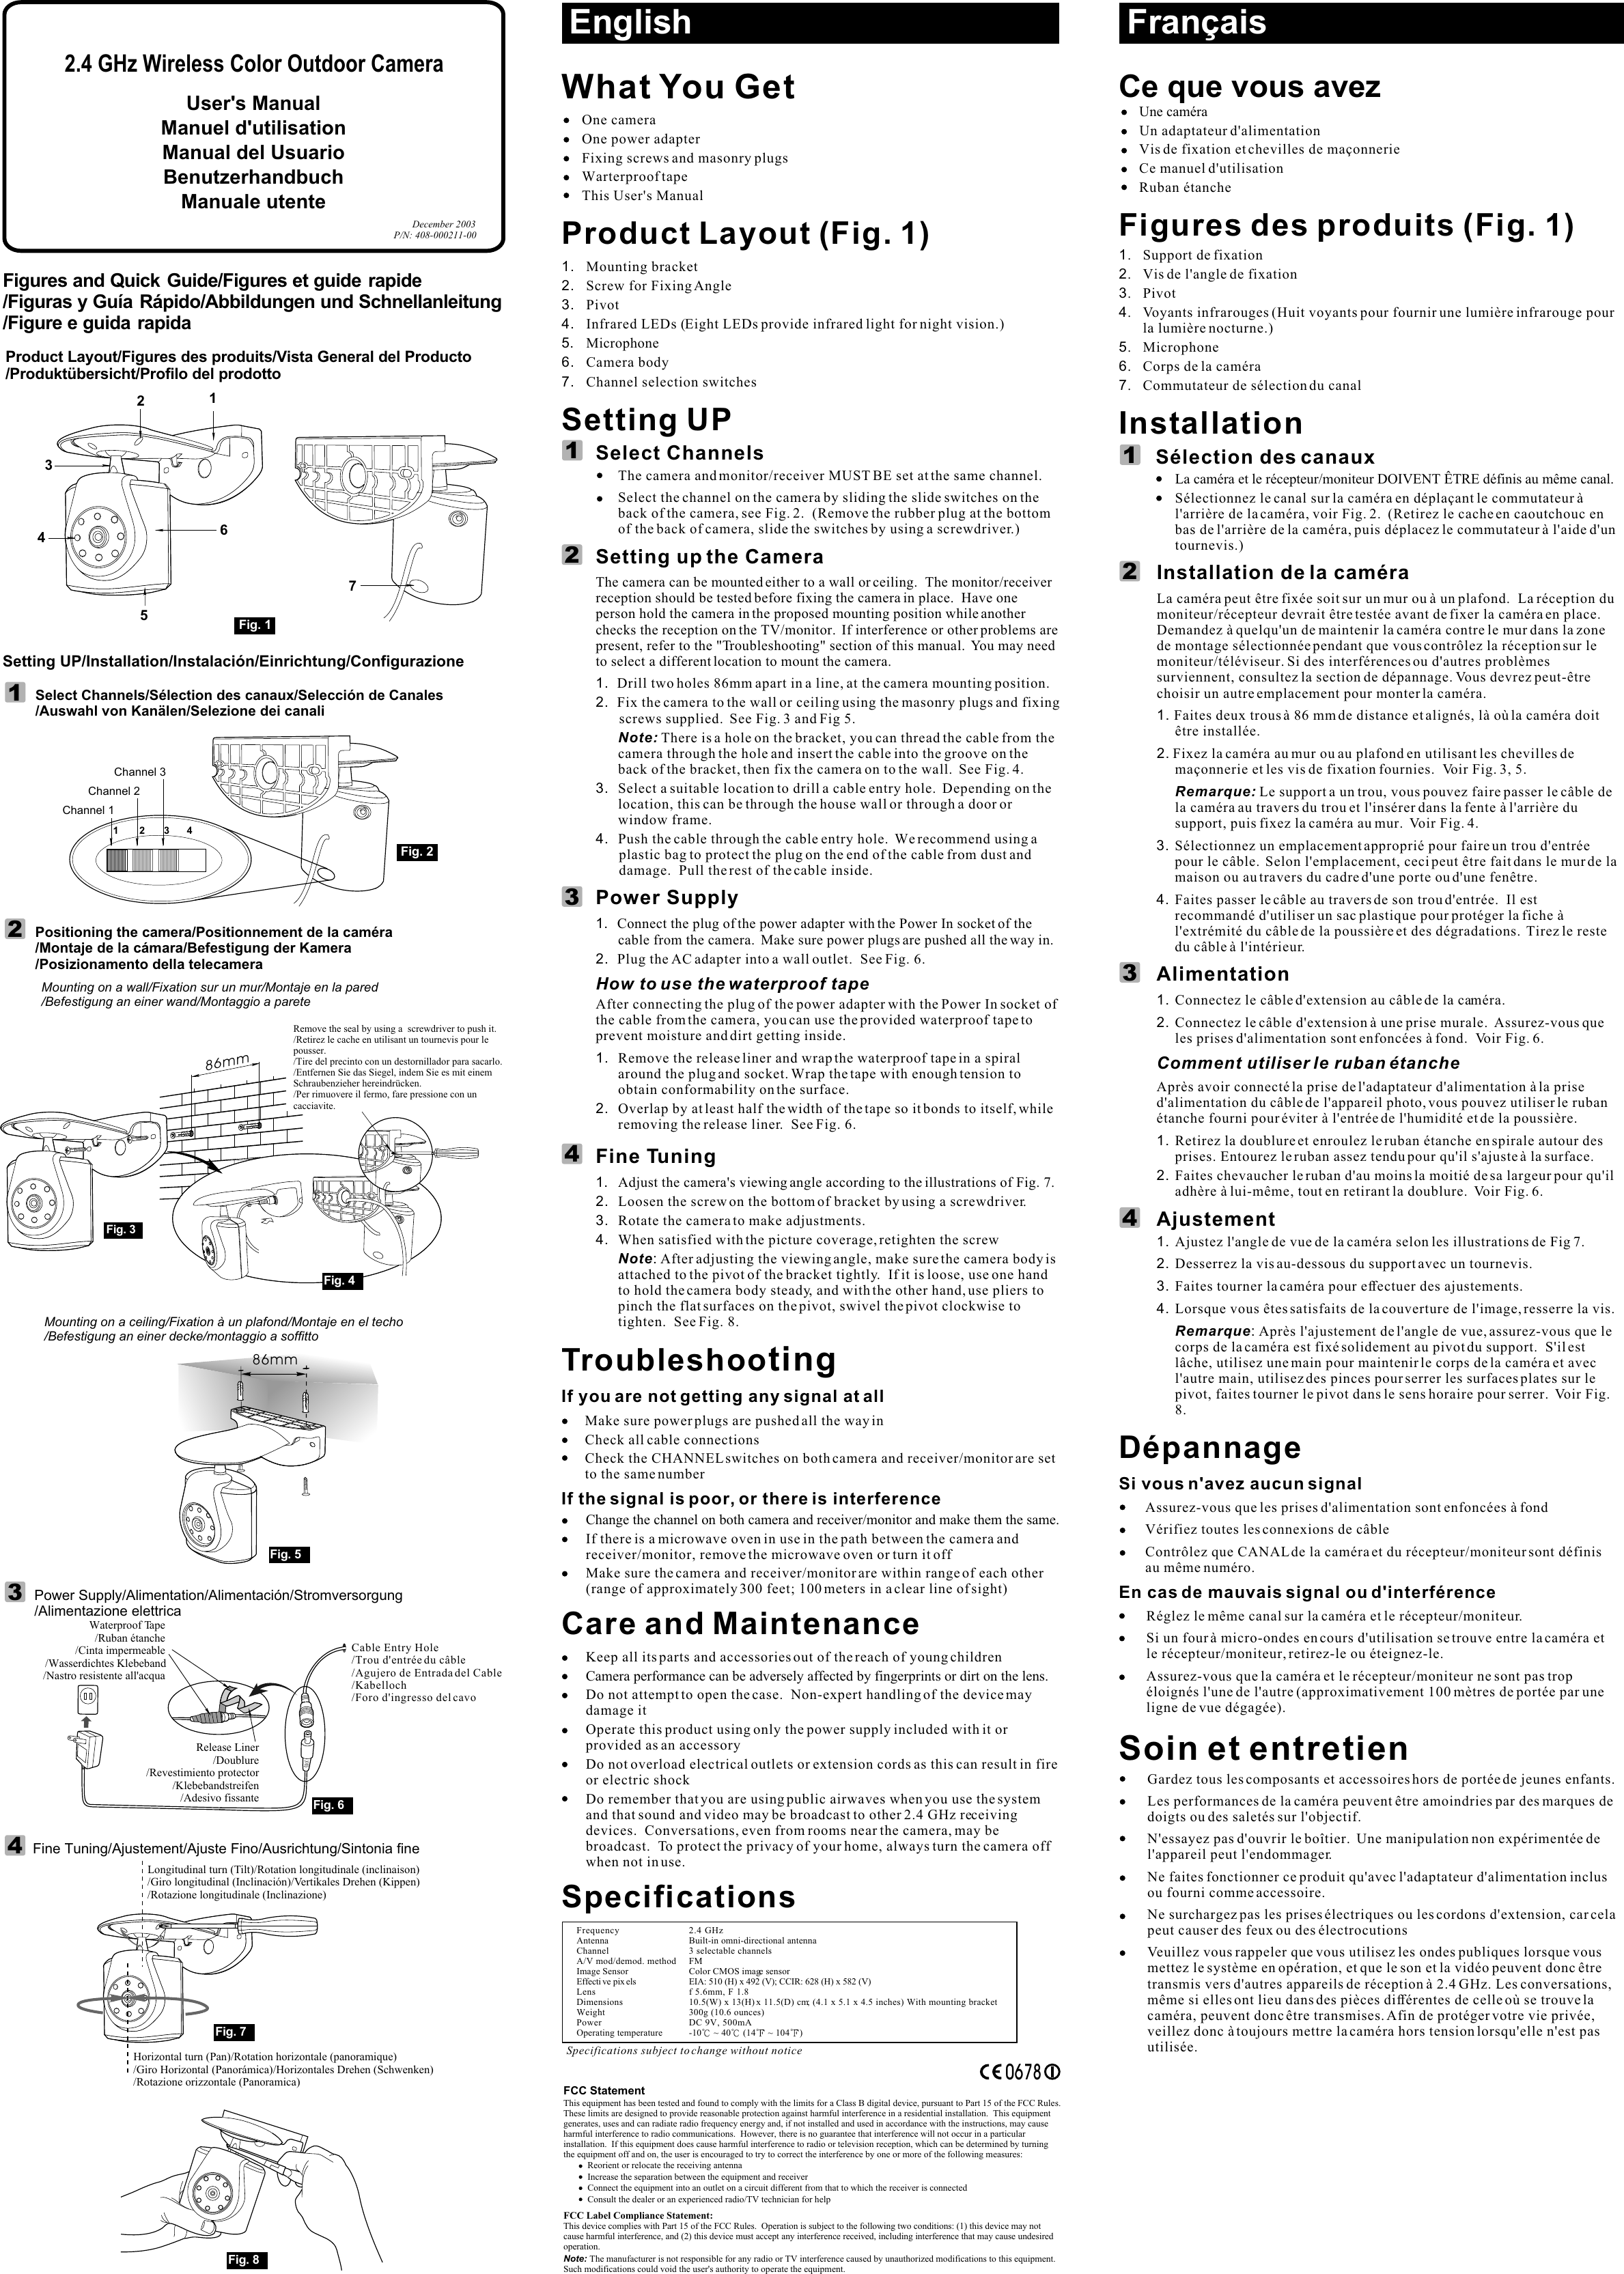 Product Layout/Figures des produits/Vista General del Producto/Produktübersicht/Profilo del prodottoSetting UP/Installation/Instalación/Einrichtung/Configurazione User&apos;s ManualManuel d&apos;utilisationManual del UsuarioBenutzerhandbuchManuale utenteDecember 2003P/N: 408-000211-00Figures and Quick Guide//Figures et guide rapideFiguras y Guía Rápido/Abbildungen und Schnellanleitung/Figure e guida rapida712456Fig. 133Positioning the camera/Positionnement de la caméra/Montaje de la cámara/Befestigung der Kamera/Posizionamento della telecameraMounting on a ceiling/Fixation à un plafond/Montaje en el techo/Befestigung an einer decke/montaggio a soffitto86mmLongitudinal turn (Tilt)/Rotation longitudinale (inclinaison)/Giro longitudinal (Inclinación)/Vertikales Drehen (Kippen)/Rotazione longitudinale (Inclinazione)Horizontal turn (Pan)/Rotation horizontale (panoramique)/Giro Horizontal (Panorámica)/Horizontales Drehen (Schwenken)/Rotazione orizzontale (Panoramica)Fig. 5Fig. 8Power Supply/Alimentation/Alimentación/Stromversorgung/Alimentazione elettricaFine Tuning/Ajustement/Ajuste Fino/Ausrichtung/Sintonia fine86mmFig. 3Fig. 4Remove the seal by using a  screwdriver to push it./Retirez le cache en utilisant un tournevis pour le pousser./Tire del precinto con un destornillador para sacarlo./Entfernen Sie das Siegel, indem Sie es mit einem Schraubenzieher hereindr ken./Per rimuovere il fermo, fare pressione con un cacciavite.ücFig. 7Fig. 6Cable Entry Hole//Agujero de Entrada del Cable/Kabelloch/Foro d&apos;ingresso del cavoTrou d&apos;entrée du câbleRelease Liner/Doublure/Revestimiento protector/Klebebandstreifen/Adesivo fissanteWaterproof Tape/Ruban étanche/Cinta impermeable/Wasserdichtes Klebeband/Nastro resistente all&apos;acqua2.4 GHz Wireless Color Outdoor Camera English113322What You GetOne cameraOne power adapter Fixing screws and masonry plugsWarterproof tapeThis User&apos;s ManualProduct Layout (Fig. 1)1. Mounting bracket2. Screw for Fixing Angle3. Pivot4. Infrared LEDs (Eight LEDs provide infrared light for night vision.) 5. Microphone6. Camera body7. Channel selection switchesSetting UPSelect ChannelsThe camera and monitor/receiver MUST BE set at the same channel.Select the channel on the camera by sliding the slide switches on the back of the camera, see Fig. 2.  (Remove the rubber plug at the bottom of the back of camera, slide the switches by using a screwdriver.)Setting up the CameraThe camera can be mounted either to a wall or ceiling.  The monitor/receiver reception should be tested before fixing the camera in place.  Have one person hold the camera in the proposed mounting position while another checks the reception on the TV/monitor.  If interference or other problems are present, refer to the &quot;Troubleshooting&quot; section of this manual.  You may need to select a different location to mount the camera.1. Drill two holes 86mm apart in a line, at the camera mounting position.2.  Fix the camera to the wall or ceiling using the masonry plugs and fixing screws supplied.  See Fig. 3 and Fig 5. Note: There is a hole on the bracket, you can thread the cable from the camera through the hole and insert the cable into the groove on the back of the bracket, then fix the camera on to the wall.  See Fig. 4.3. Select a suitable location to drill a cable entry hole.  Depending on the location, this can be through the house wall or through a door or window frame.4. Push the cable through the cable entry hole.  We recommend using a plastic bag to protect the plug on the end of the cable from dust and damage.  Pull the rest of the cable inside.Power Supply 1. Connect the plug of the power adapter with the Power In socket of the cable from the camera.  Make sure power plugs are pushed all the way in.2. Plug the AC adapter into a wall outlet.  See Fig. 6.How to use the waterproof tapeAfter connecting the plug of the power adapter with the Power In socket of the cable from the camera, you can use the provided waterproof tape to prevent moisture and dirt getting inside.1.  Remove the release liner and wrap the waterproof tape in a spiral around the plug and socket. Wrap the tape with enough tension to obtain conformability on the surface.2.  Overlap by at least half the width of the tape so it bonds to itself, while removing the release liner.  See Fig. 6.Fine Tuning1. Adjust the camera&apos;s viewing angle according to the illustrations of Fig. 7.2. Loosen the screw on the bottom of bracket by using a screwdriver.3. Rotate the camera to make adjustments.4. When satisfied with the picture coverage, retighten the screw Note: After adjusting the viewing angle, make sure the camera body is attached to the pivot of the bracket tightly.  If it is loose, use one hand to hold the camera body steady, and with the other hand, use pliers to pinch the flat surfaces on the pivot, swivel the pivot clockwise to tighten.  See Fig. 8.TroubleshootingIf you are not getting any signal at allMake sure power plugs are pushed all the way inCheck all cable connectionsCheck the CHANNEL switches on both camera and receiver/monitor are set to the same numberIf the signal is poor, or there is interferenceChange the channel on both camera and receiver/monitor and make them the same.If there is a microwave oven in use in the path between the camera and receiver/monitor, remove the microwave oven or turn it offMake sure the camera and receiver/monitor are within range of each other (range of approximately 300 feet; 100 meters in a clear line of sight)Care and MaintenanceKeep all its parts and accessories out of the reach of young childrenCamera performance can be adversely affected by fingerprints or dirt on the lens.  Do not attempt to open the case.  Non-expert handling of the device may damage itOperate this product using only the power supply included with it or provided as an accessoryDo not overload electrical outlets or extension cords as this can result in fire or electric shockDo remember that you are using public airwaves when you use the system and that sound and video may be broadcast to other 2.4 GHz receiving devices.  Conversations, even from rooms near the camera, may be broadcast.  To protect the privacy of your home, always turn the camera off when not in use.Specifications0678Specifications subject to change without noticeFrequency 2.4 GHzAntenna Built-in omni-directional antennaChannel 3 selectable channelsA/V mod/demod. method FMImage Sensor Color CMOS image sensorEffecti ve pix els EIA: 510 (H) x 492 (V); CCIR: 628 (H) x 582 (V)Lens f 5.6mm, F 1.8Dimensions 10.5(W) x 13(H) x 11.5(D) cm; (4.1 x 5.1 x 4.5 inches) With mounting bracketWeight  300g (10.6 ounces) Power DC 9V, 500mA Operating temperature -10  ~ 40  (14  ~ 104 )FCC StatementThis equipment has been tested and found to comply with the limits for a Class B digital device, pursuant to Part 15 of the FCC Rules.  These limits are designed to provide reasonable protection against harmful interference in a residential installation.  This equipment generates, uses and can radiate radio frequency energy and, if not installed and used in accordance with the instructions, may cause harmful interference to radio communications.  However, there is no guarantee that interference will not occur in a particular installation.  If this equipment does cause harmful interference to radio or television reception, which can be determined by turning the equipment off and on, the user is encouraged to try to correct the interference by one or more of the following measures:Reorient or relocate the receiving antennaIncrease the separation between the equipment and receiverConnect the equipment into an outlet on a circuit different from that to which the receiver is connectedConsult the dealer or an experienced radio/TV technician for helpFCC Label Compliance Statement:This device complies with Part 15 of the FCC Rules.  Operation is subject to the following two conditions: (1) this device may not cause harmful interference, and (2) this device must accept any interference received, including interference that may cause undesired operation.Note: The manufacturer is not responsible for any radio or TV interference caused by unauthorized modifications to this equipment.  Such modifications could void the user&apos;s authority to operate the equipment.Ce que vous avezUn adaptateur d&apos;alimentationFigures des produits (Fig. 1)1. Support de fixation2. Vis de l&apos;angle de fixation3. Pivot4. Voyants infrarouges (Huit voyants pour fournir une lumière infrarouge pour la lumière nocturne.) 5. Microphone6. Corps de la caméra7. Commutateur de sélection du canal InstallationSélection des canaux La caméra et le récepteur/moniteur DOIVENT ÊTRE définis au même canal.Sélectionnez le canal sur la caméra en déplaçant le commutateur à l&apos;arrière de la caméra,    (Retirez le cache en caoutchouc en bas de l&apos;arrière de la caméra, puis déplacez le commutateur à l&apos;aide d&apos;un tournevis.)Installation de la caméraLa caméra peut être fixée soit sur un mur ou à un plafond.  La réception du moniteur/récepteur devrait être testée avant de fixer la caméra en place. Demandez à quelqu&apos;un de maintenir la caméra contre le mur dans la zone de montage sélectionnée pendant que vous contrôlez la réception sur le moniteur/téléviseur. Si des interférences ou d&apos;autres problèmes surviennent, consultez la section de dépannage. Vous devrez peut-être choisir un autre emplacement pour monter la caméra.1. Faites deux trous à 86 mm de distance et alignés, là où la caméra doit être installée.  2. Fixez la caméra au mur ou au plafond en utilisant les chevilles de maçonnerie et les vis de fixation fournies.  Voir Fig. 3, 5.Remarque: Le support a un trou, vous pouvez faire passer le câble de la caméra au travers du trou et l&apos;insérer dans la fente à l&apos;arrière du support, puis fixez la caméra au mur.  Voir Fig. 4.3. Sélectionnez un emplacement approprié pour faire un trou d&apos;entrée pour le câble.  Selon l&apos;emplacement, ceci peut être fait dans le mur de la maison ou au travers du cadre d&apos;une porte ou d&apos;une fenêtre.4. Faites passer le câble au travers de son trou d&apos;entrée.  Il est recommandé d&apos;utiliser un sac plastique pour protéger la fiche à l&apos;extrémité du câble de la poussière et des dégradations.  Tirez le reste du câble à l&apos;intérieur.Alimentation 1. Connectez le câble d&apos;extension au câble de la caméra.  2. Connectez le câble d&apos;extension à une prise murale.  Assurez-vous que les prises d&apos;alimentation sont enfoncées à fond.  Voir Fig. 6. Comment utiliser le ruban étancheAprès avoir connecté la prise de l&apos;adaptateur d&apos;alimentation à la prise d&apos;alimentation du câble de l&apos;appareil photo, vous pouvez utiliser le ruban étanche fourni pour éviter à l&apos;entrée de l&apos;humidité et de la poussière.1. Retirez la doublure et enroulez le ruban étanche en spirale autour des prises. Entourez le ruban assez tendu pour qu&apos;il s&apos;ajuste à la surface. 2. Faites chevaucher le ruban d&apos;au moins la moitié de sa largeur pour qu&apos;il adhère à lui-même, tout en retirant la doublure.  Voir Fig. 6.AjustementDépannageSi vous n&apos;avez aucun signalAssurez-vous que les prises d&apos;alimentation sont enfoncées à fondVérifiez toutes les connexions de câbleContrôlez que CANAL de la caméra et du récepteur/moniteur sont définis au même numéro.En cas de mauvais signal ou d&apos;interférenceRéglez le même canal sur la caméra et le récepteur/moniteur.i un four à micro-ondes en cours d&apos;utilisation se trouve entre la caméra et le récepteur/moniteur, retirez-le ou éteignez-le.ssurez-vous que la caméra et le récepteur/moniteur ne sont pas trop éloignés l&apos;une de l&apos;autre (approximativement 100 mètres de portée par une ligne de vue dégagée).Soin et entretienGardez tous les composants et accessoires hors de portée de jeunes enfants.Les performances de la caméra peuvent être amoindries par des marques de doigts ou des saletés sur l&apos;objectif. N&apos;essayez pas d&apos;ouvrir le boîtier.  Une manipulation non expérimentée de l&apos;appareil peut l&apos;endommager.Ne faites fonctionner ce produit qu&apos;avec l&apos;adaptateur d&apos;alimentation inclus ou fourni comme accessoire.Ne surchargez pas les prises électriques ou les cordons d&apos;extension, car cela peut causer des feux ou des électrocutionsUne caméraVis de fixation et chevilles de maçonnerieCe manuel d&apos;utilisationRuban étanchevoir Fig. 2.1. Ajustez l&apos;angle de vue de la caméra selon les illustrations de Fig 7.2. Desserrez la vis au-dessous du support avec un tournevis.3. Faites tourner la caméra pour effectuer des ajustements.4. Lorsque vous êtes satisfaits de la couverture de l&apos;image, resserre la vis.Remarque: Après l&apos;ajustement de l&apos;angle de vue, assurez-vous que le corps de la caméra est fixé solidement au pivot du support.  S&apos;il est lâche, utilisez une main pour maintenir le corps de la caméra et avec l&apos;autre main, utilisez des pinces pour serrer les surfaces plates sur le pivot, faites tourner le pivot dans le sens horaire pour serrer.  Voir Fig. 8.SAVeuillez vous rappeler que vous utilisez les ondes publiques lorsque vous mettez le système en opération, et que le son et la vidéo peuvent donc être transmis vers d&apos;autres appareils de réception à 2.4 GHz. Les conversations, même si elles ont lieu dans des pièces différentes de celle où se trouve la caméra, peuvent donc être transmises. Afin de protéger votre vie privée, veillez donc à toujours mettre la caméra hors tension lorsqu&apos;elle n&apos;est pas utilisée. Français4411 2 3 4Channel 1Channel 2Channel 3Fig. 2Select Channels/Sélection des canaux/Selección de Canales/Auswahl von Kanälen/Selezione dei canali2Mounting on a wall/Fixation sur un mur/Montaje en la pared/Befestigung an einer wand/Montaggio a parete4